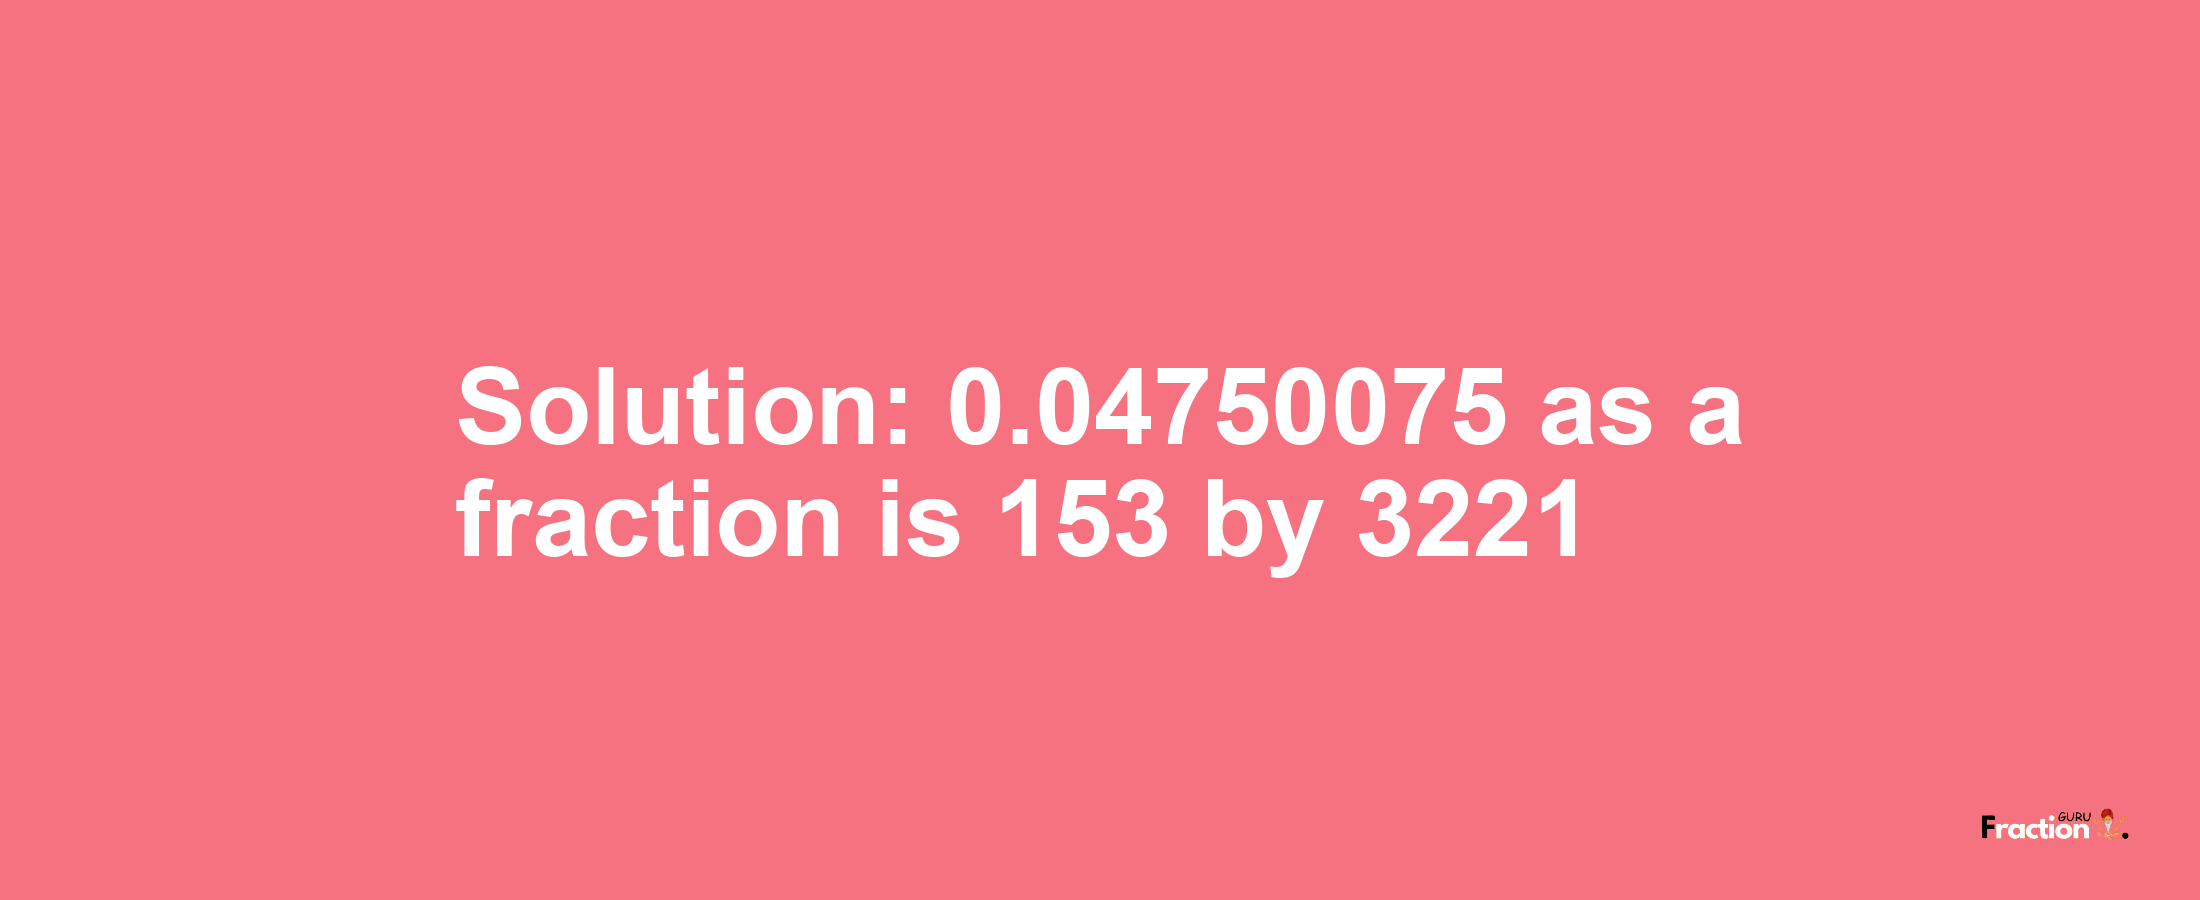 Solution:0.04750075 as a fraction is 153/3221